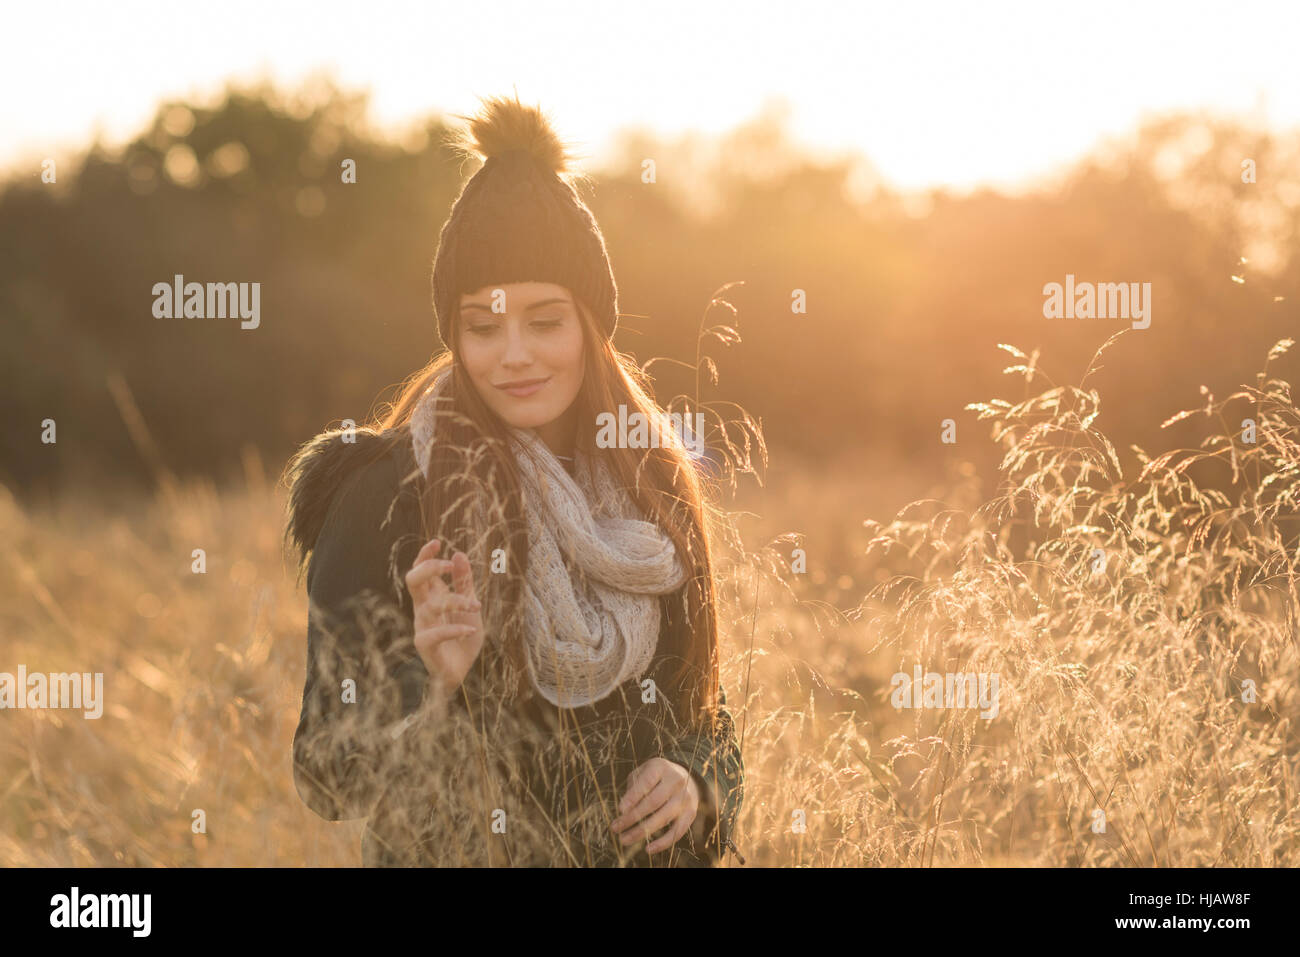 Young woman in field, looking at smartphone Stock Photo